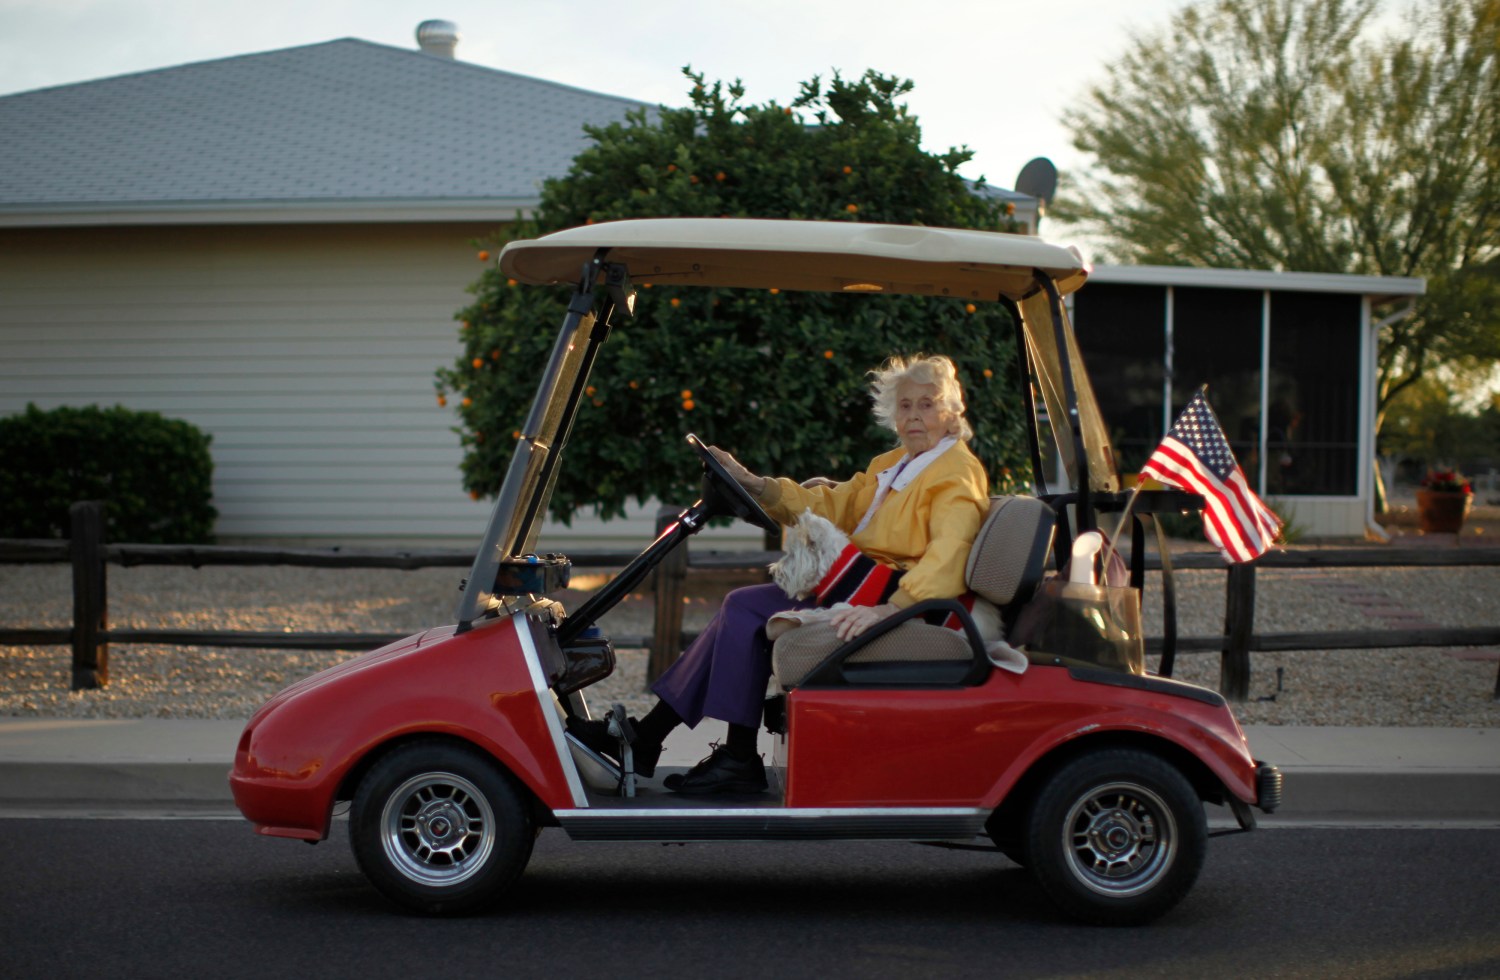 A woman rides in a golf cart with her dog in Sun City, Arizona, January 6, 2013. Sun City was built in 1959 by entrepreneur Del Webb as America?s first active retirement community for the over-55's. Del Webb predicted that retirees would flock to a community where they were given more than just a house with a rocking chair in which to sit and wait to die. Today?s residents keep their minds and bodies active by socializing at over 120 clubs with activities such as square dancing, ceramics, roller skating, computers, cheerleading, racquetball and yoga. There are 38,500 residents in the community with an average age 72.4 years. Picture taken January 6, 2013. REUTERS/Lucy Nicholson (UNITED STATES - Tags: SOCIETY)ATTENTION EDITORS - PICTURE 16 OF 30 FOR PACKAGE 'THE SPORTY SENIORS OF SUN CITY'SEARCH 'SUN CITY' FOR ALL IMAGES - LM2E91F0XAN01